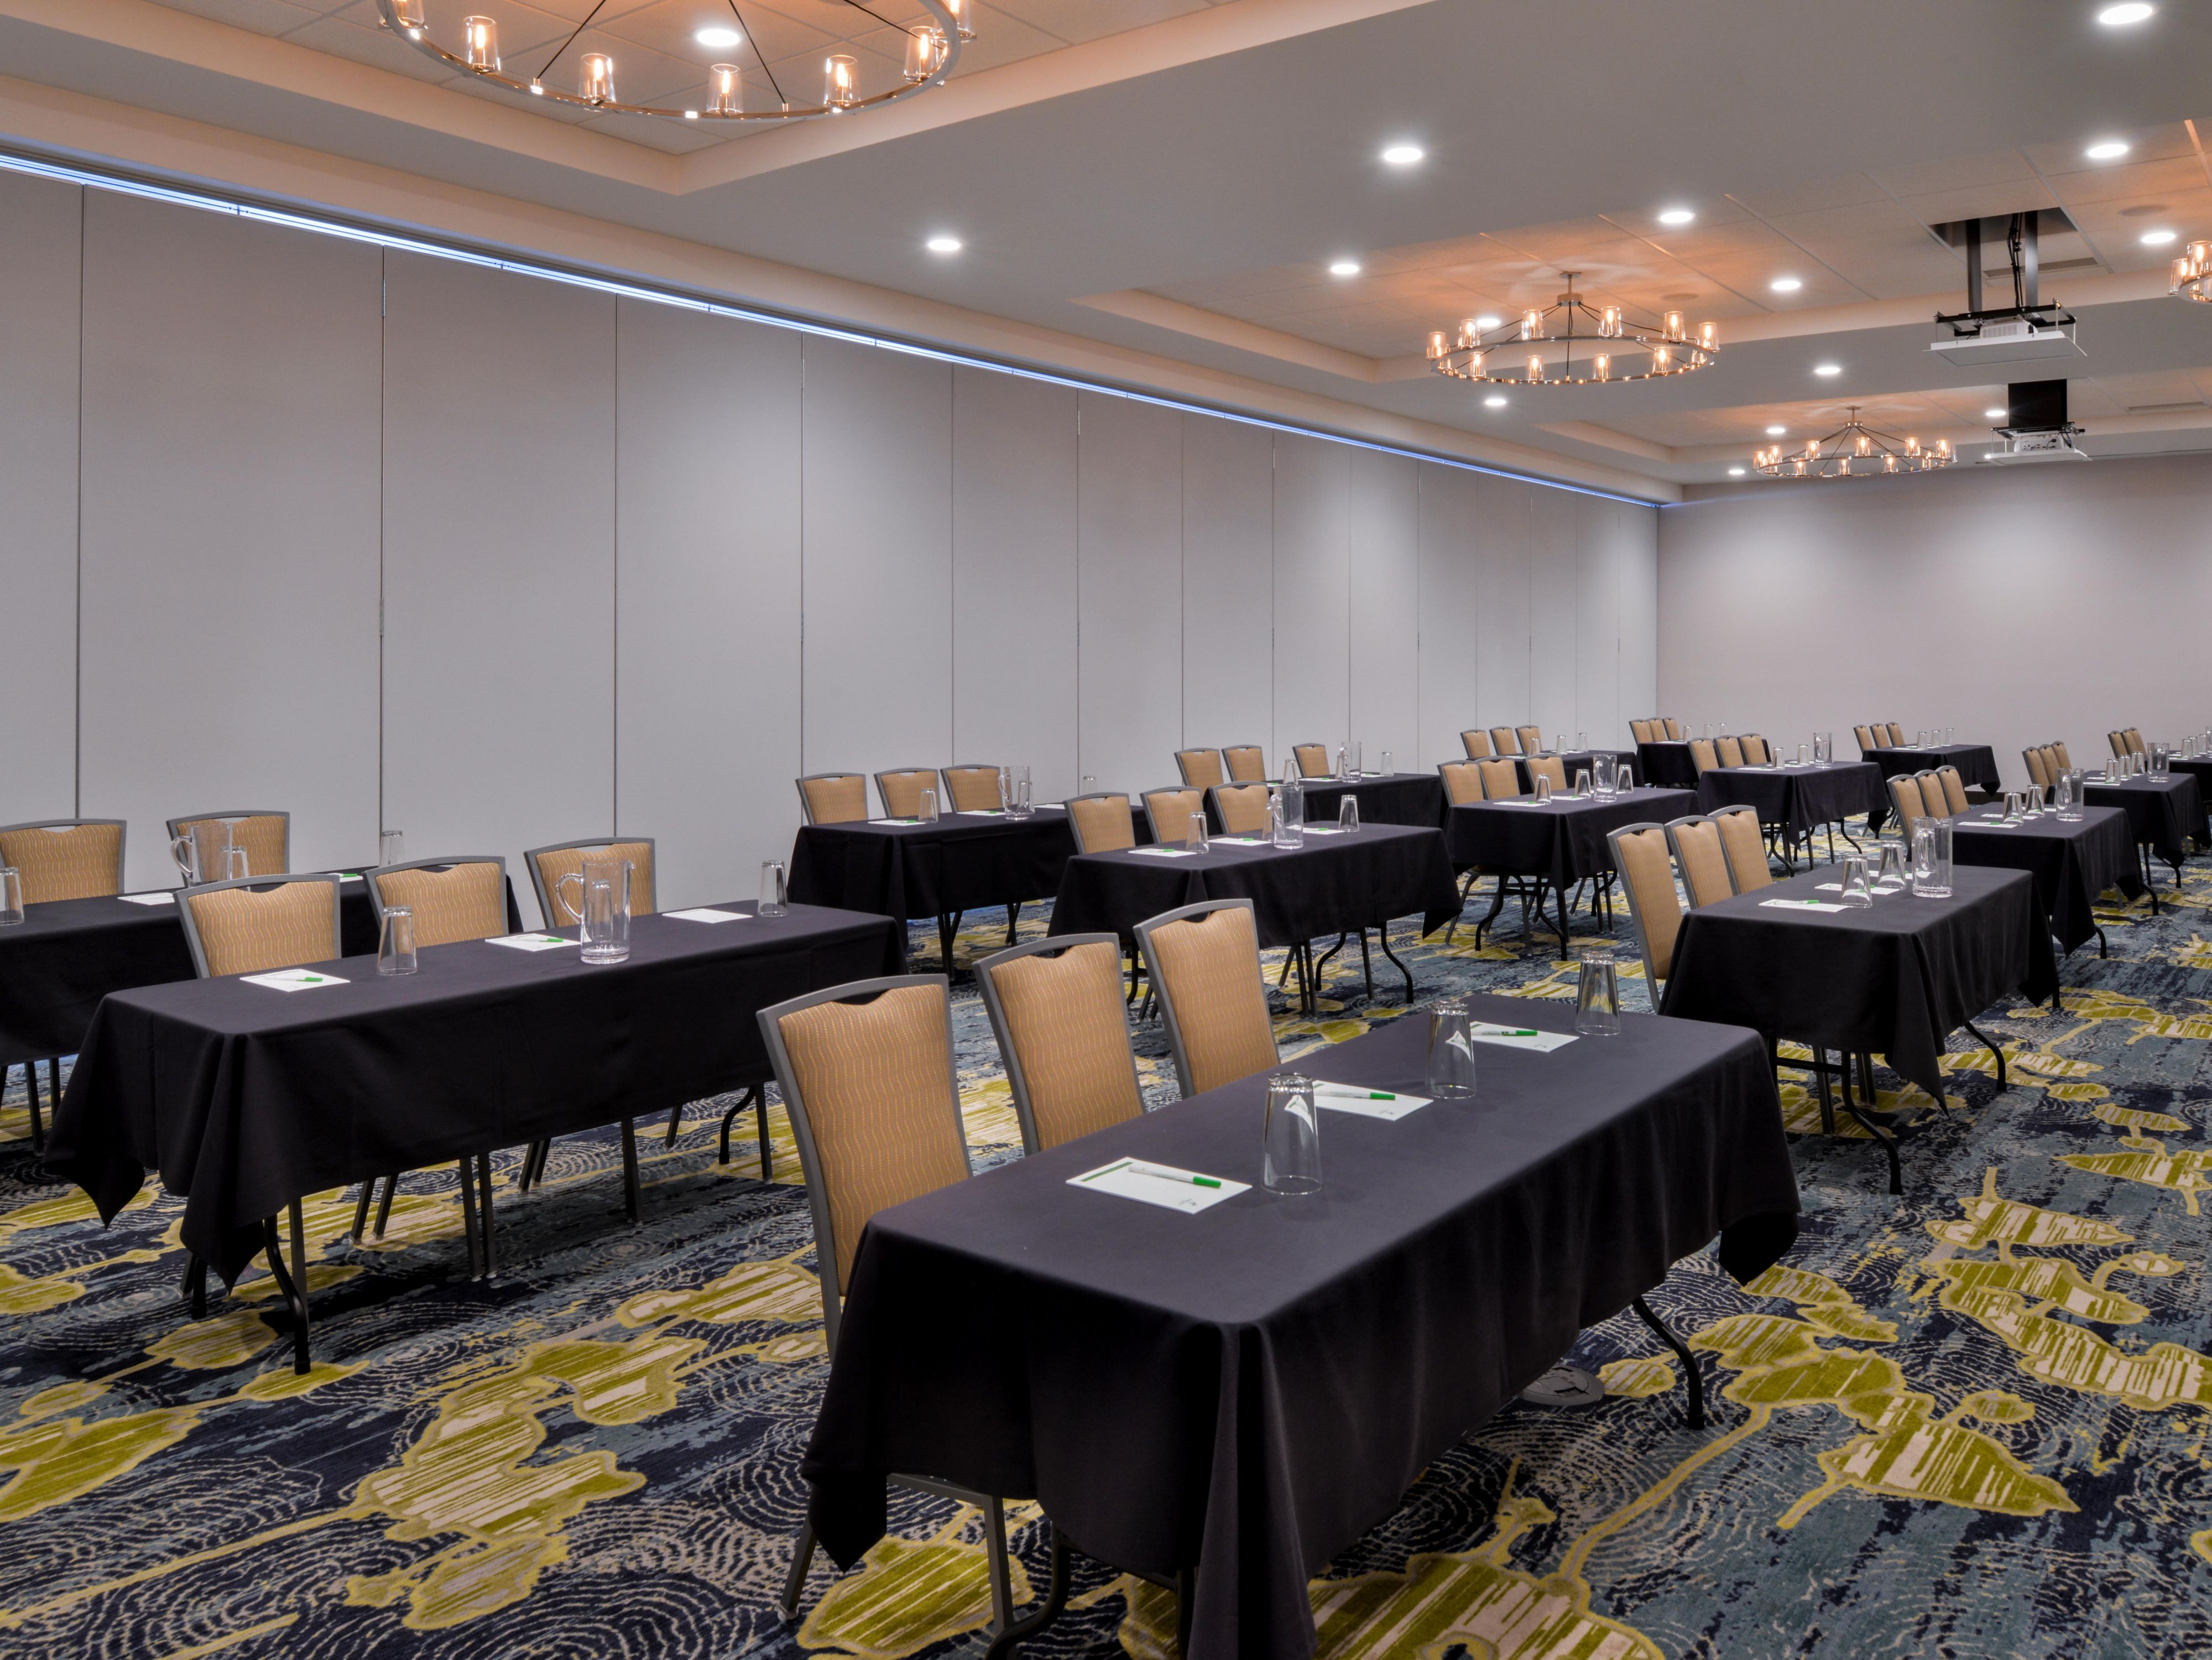 Plan your next business meeting or event in our flexible event space in Livonia. Our hotel includes a 6,000 square-foot ballroom that can accommodate 285 guests. Let our team help you with catering, audiovisual, and group rooms. Our hotel is right off I-275 and 20 minutes from Detroit Metro Airport, making travel for guests easy.